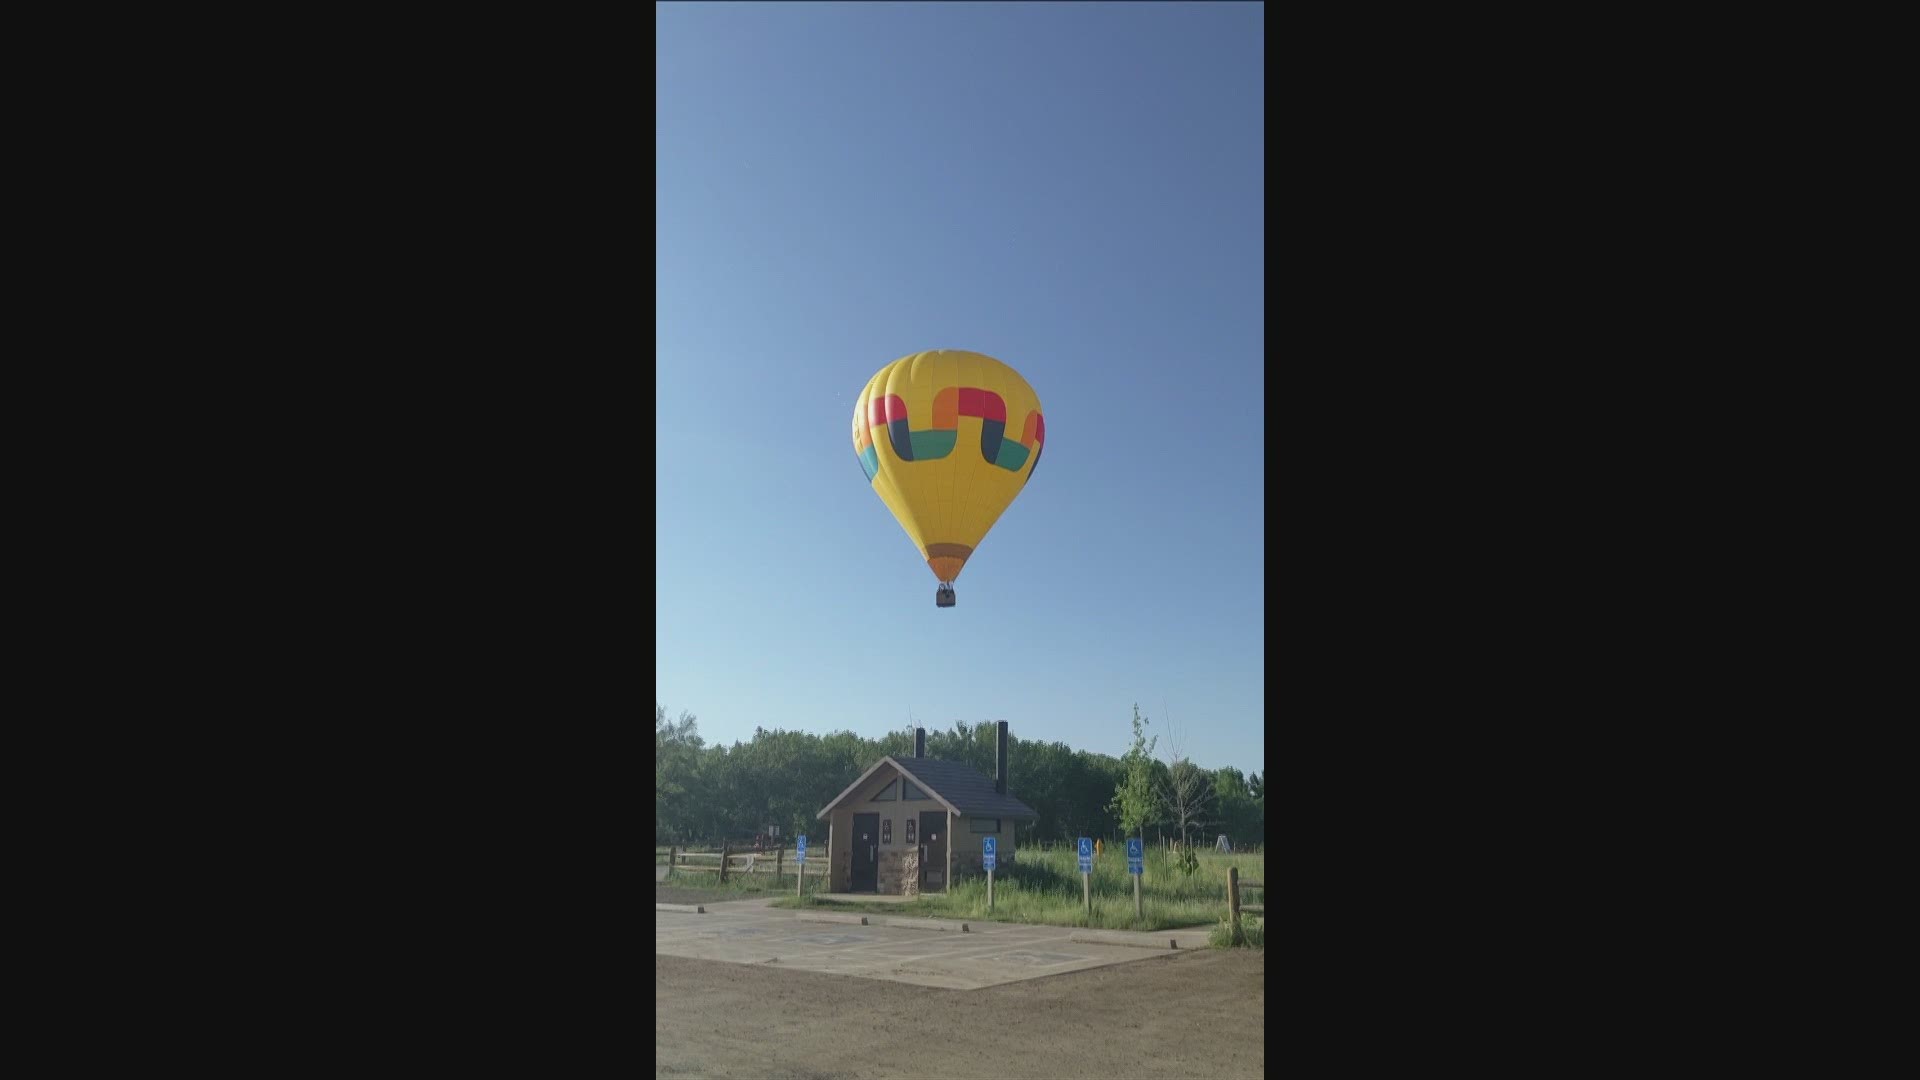 Three passengers were transported to the hospital with injuries that were not life-threatening after the balloon crash-landed Sunday morning.